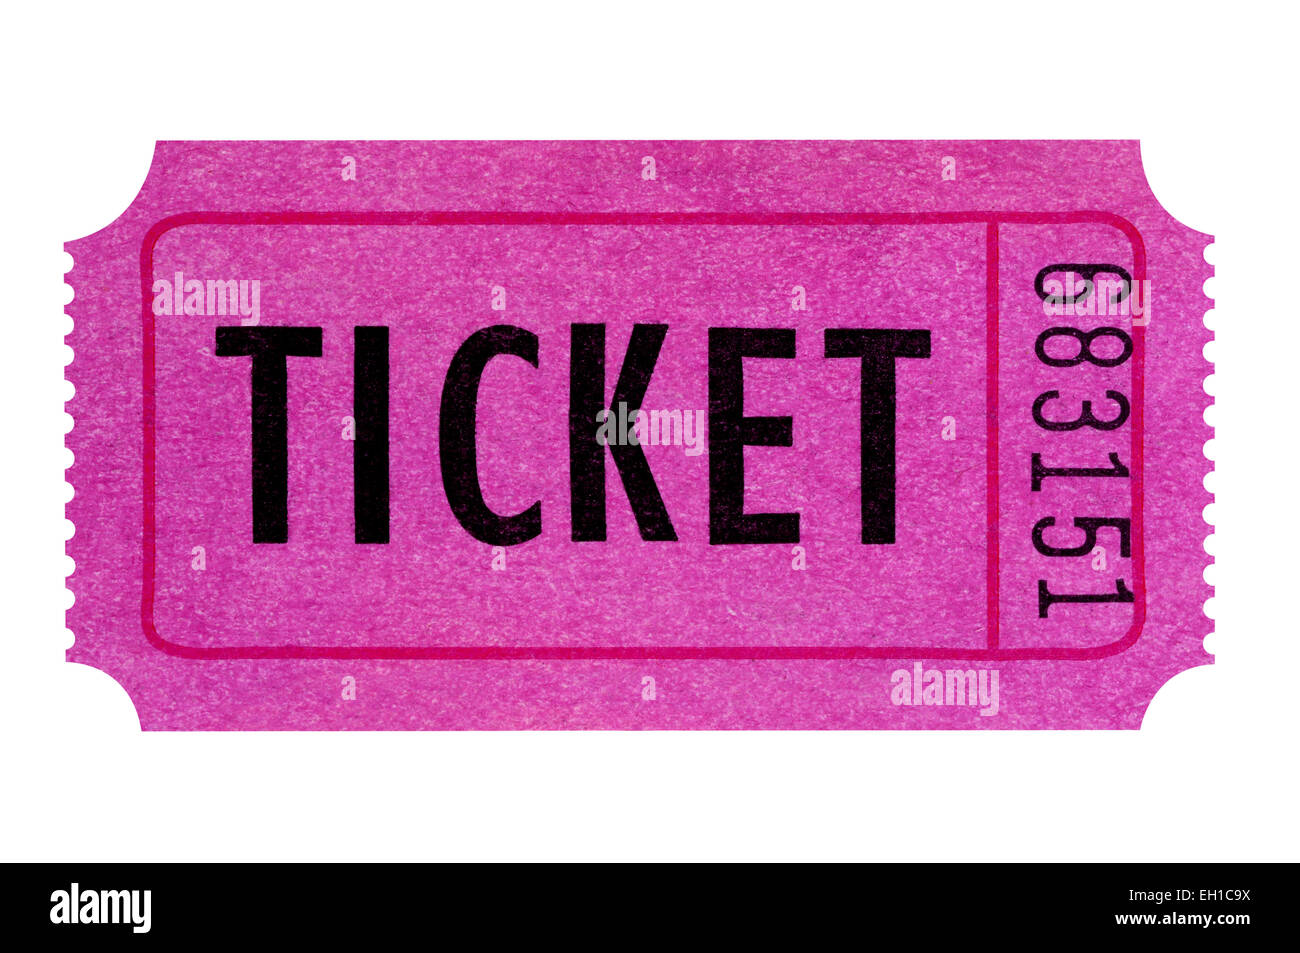 Purple or pink ticket isolated on a white background. Stock Photo